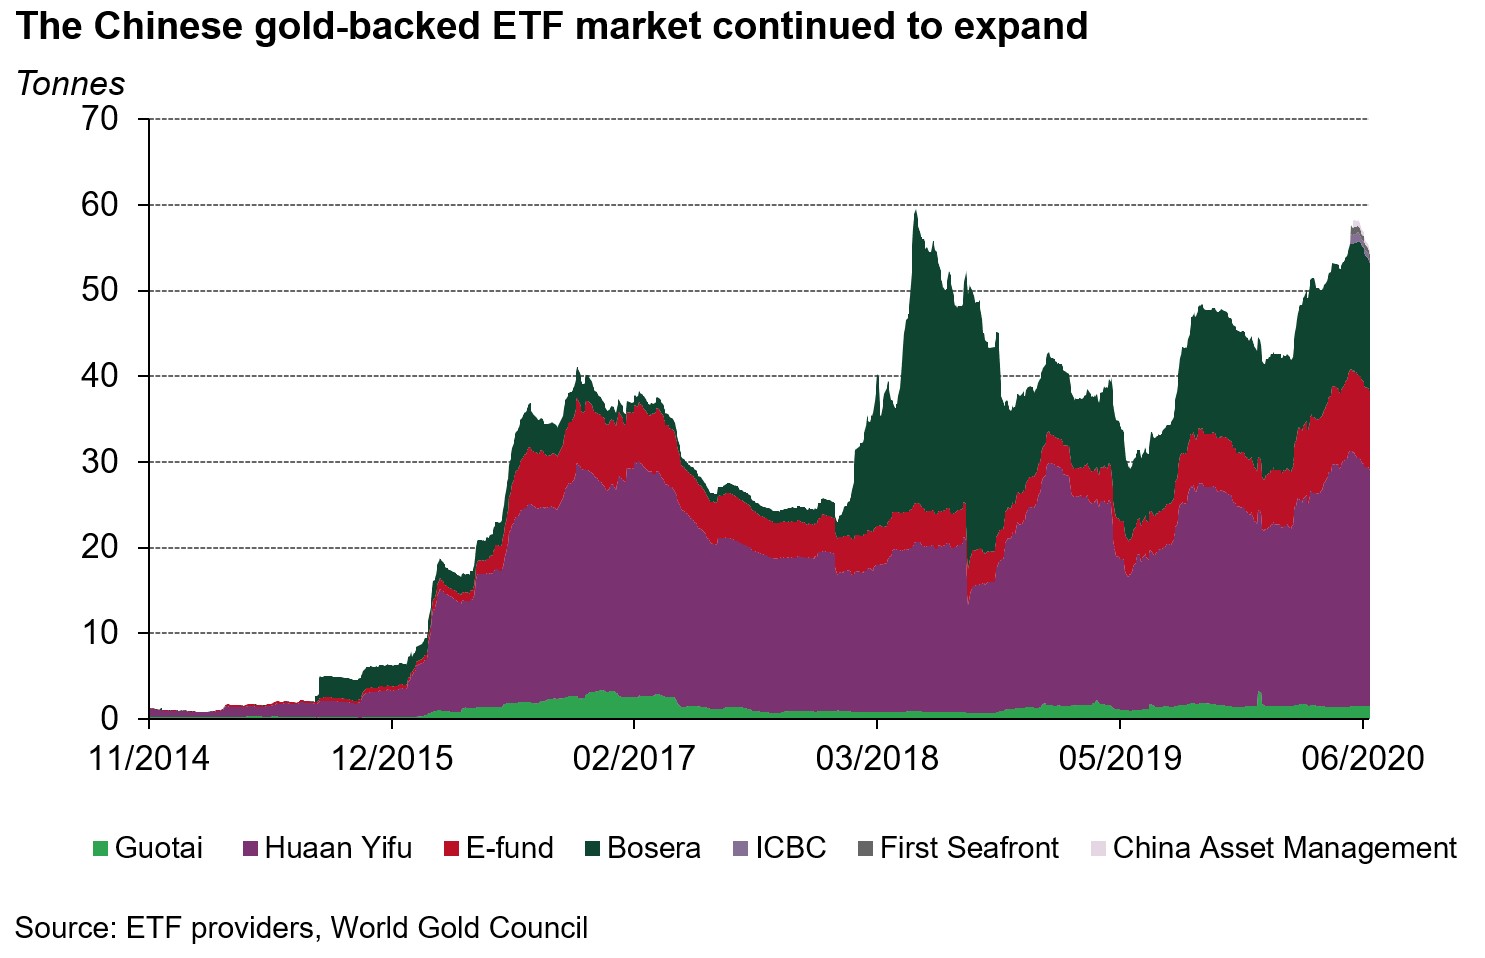 China S Gold Market In June Demand Stabilised Gold Etf Market Expanded Post By Ray Jia Gold Focus Blog World Gold Council